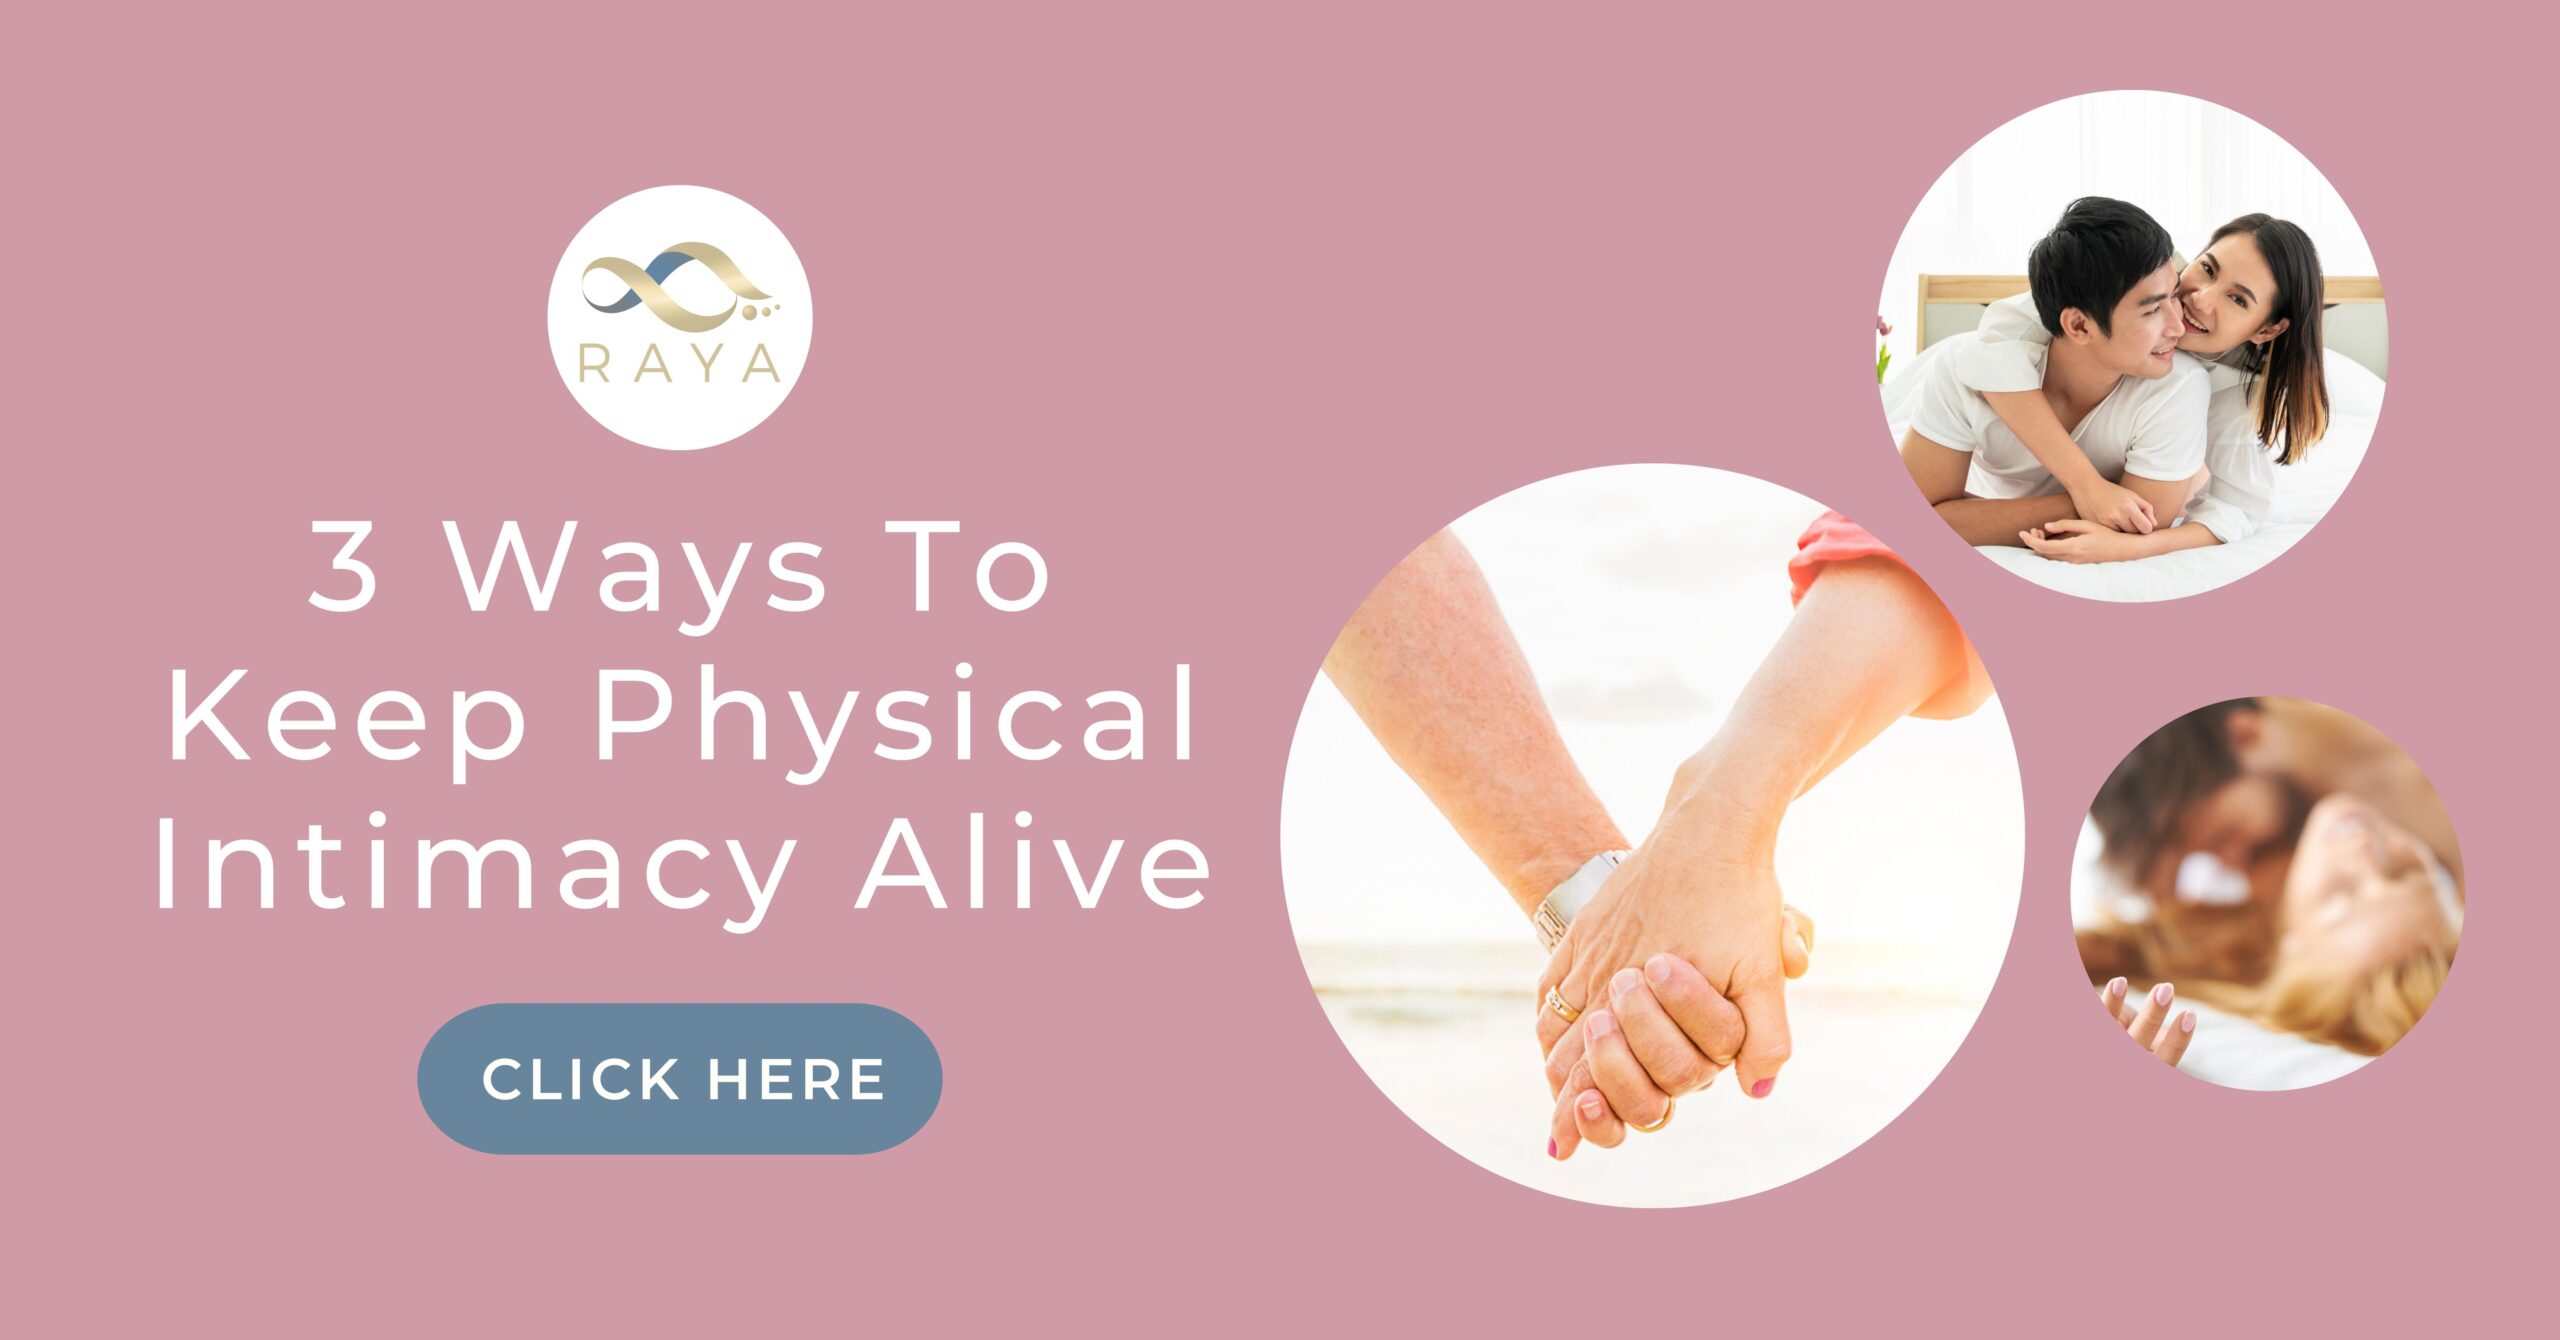 3 Ways To Keep Physical Intimacy Alive